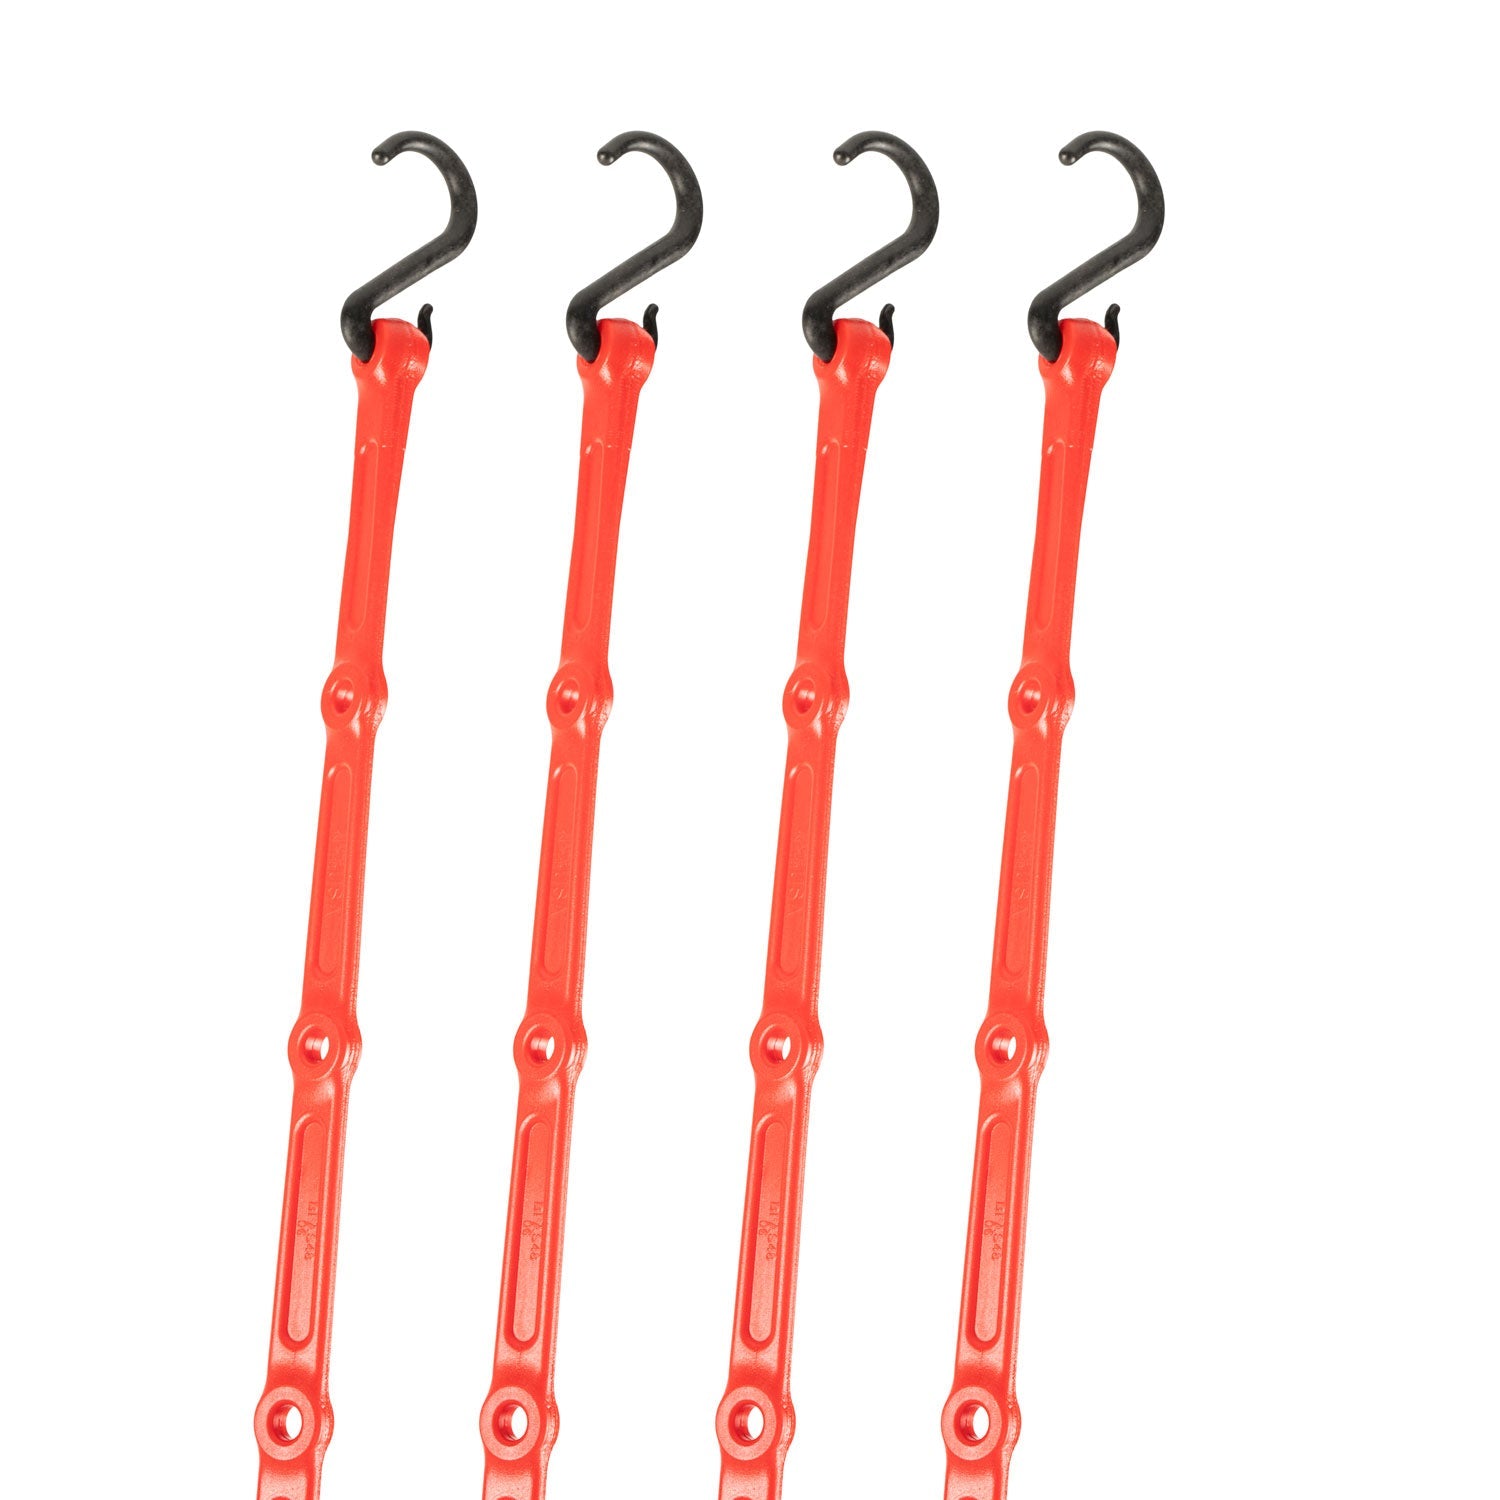 The Perfect Bungee, Adjust A Strap (4 Pack) - Premium USA Made Adjustable  Bungee Cords with Hooks (36 Inch) - Heavy Duty, Durable, All Weather, Up to